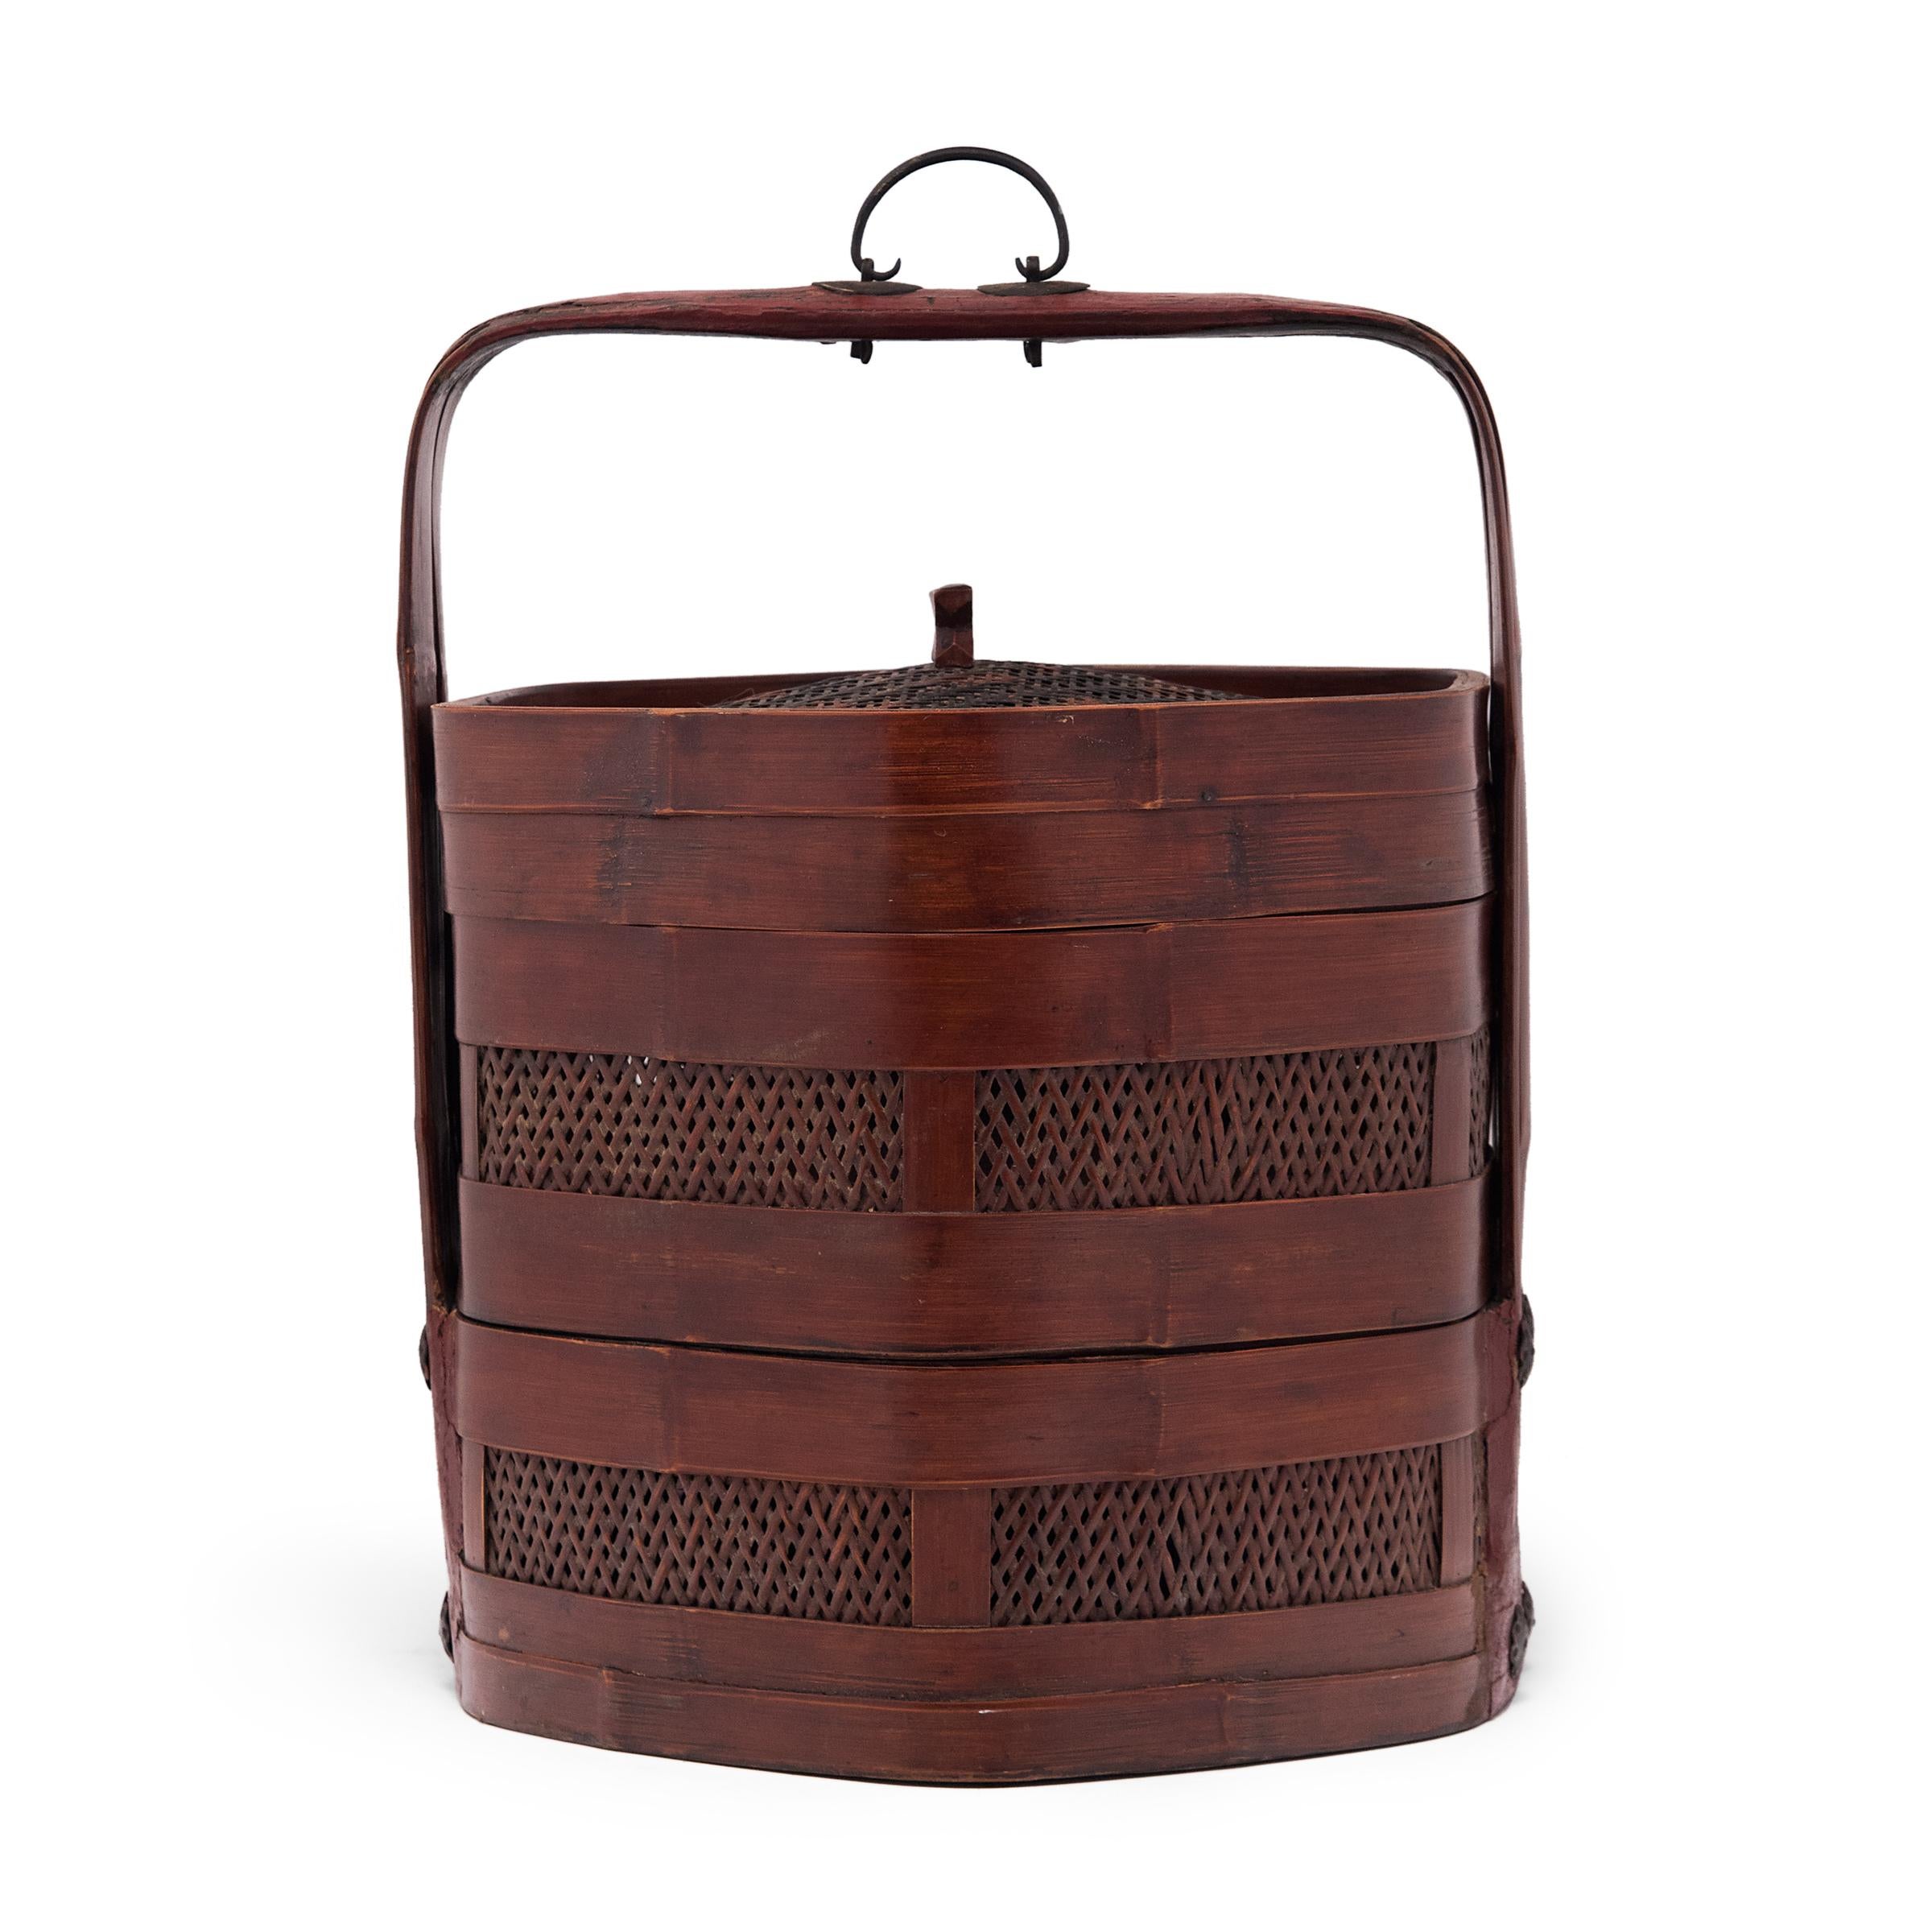 The basic form of this three-tiered Chinese box has remained unchanged for a thousand years. Used like a modern lunchbox, each tier of this portable stacking box would have been filled with food and carried around by the handle. This example dates